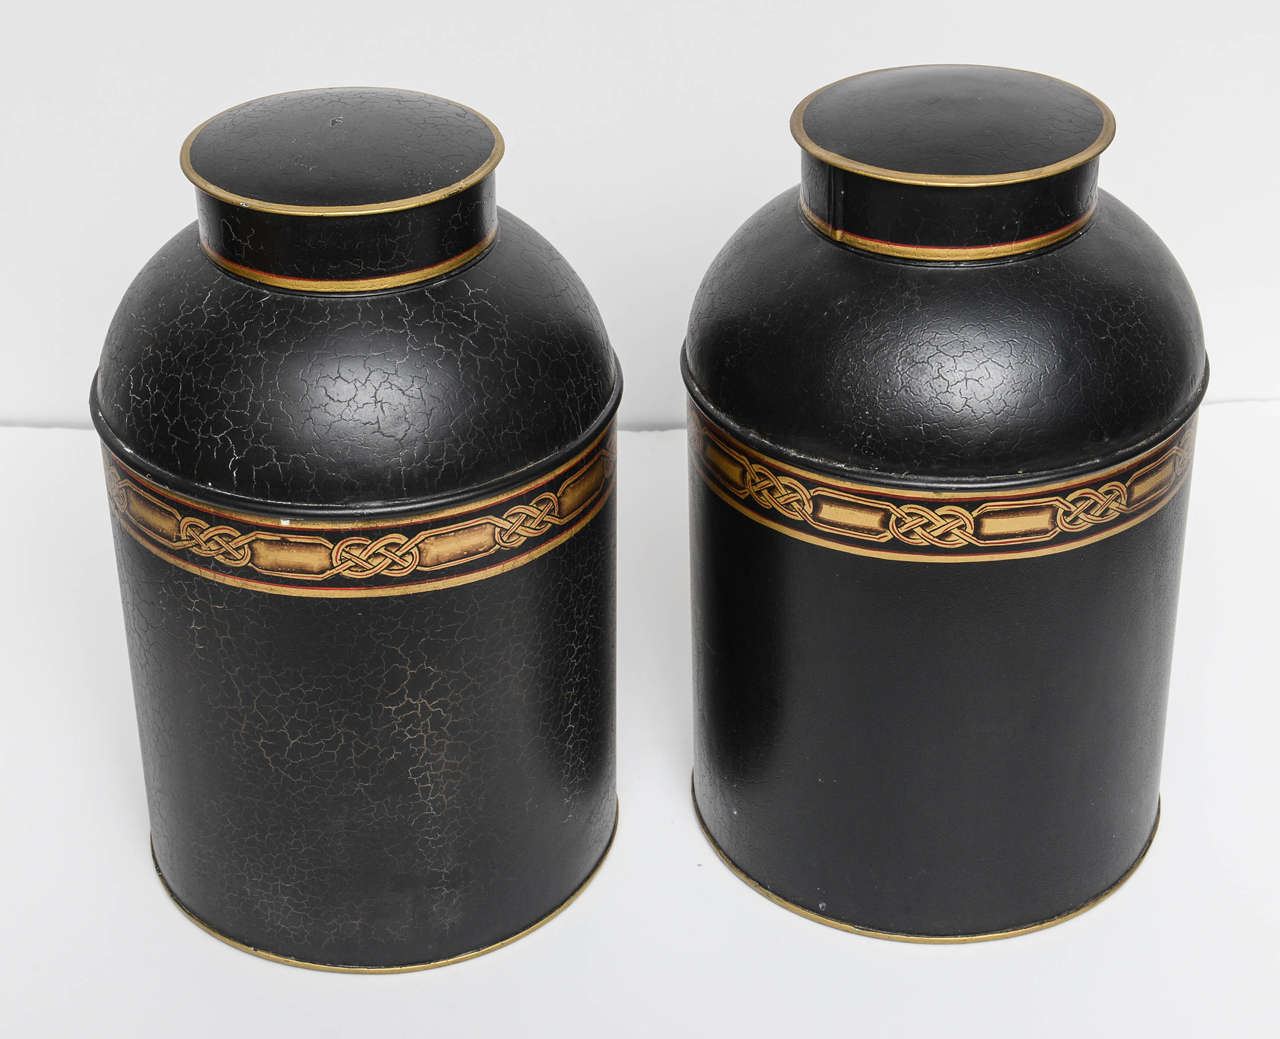 Wonderful pair of high quality canisters with a mottled black/ charcoal finish & burnished gold details.  Ideal for display & great lamp bases.  I was told they were manufactured in England by the very well know Vaughan Company which distributes in